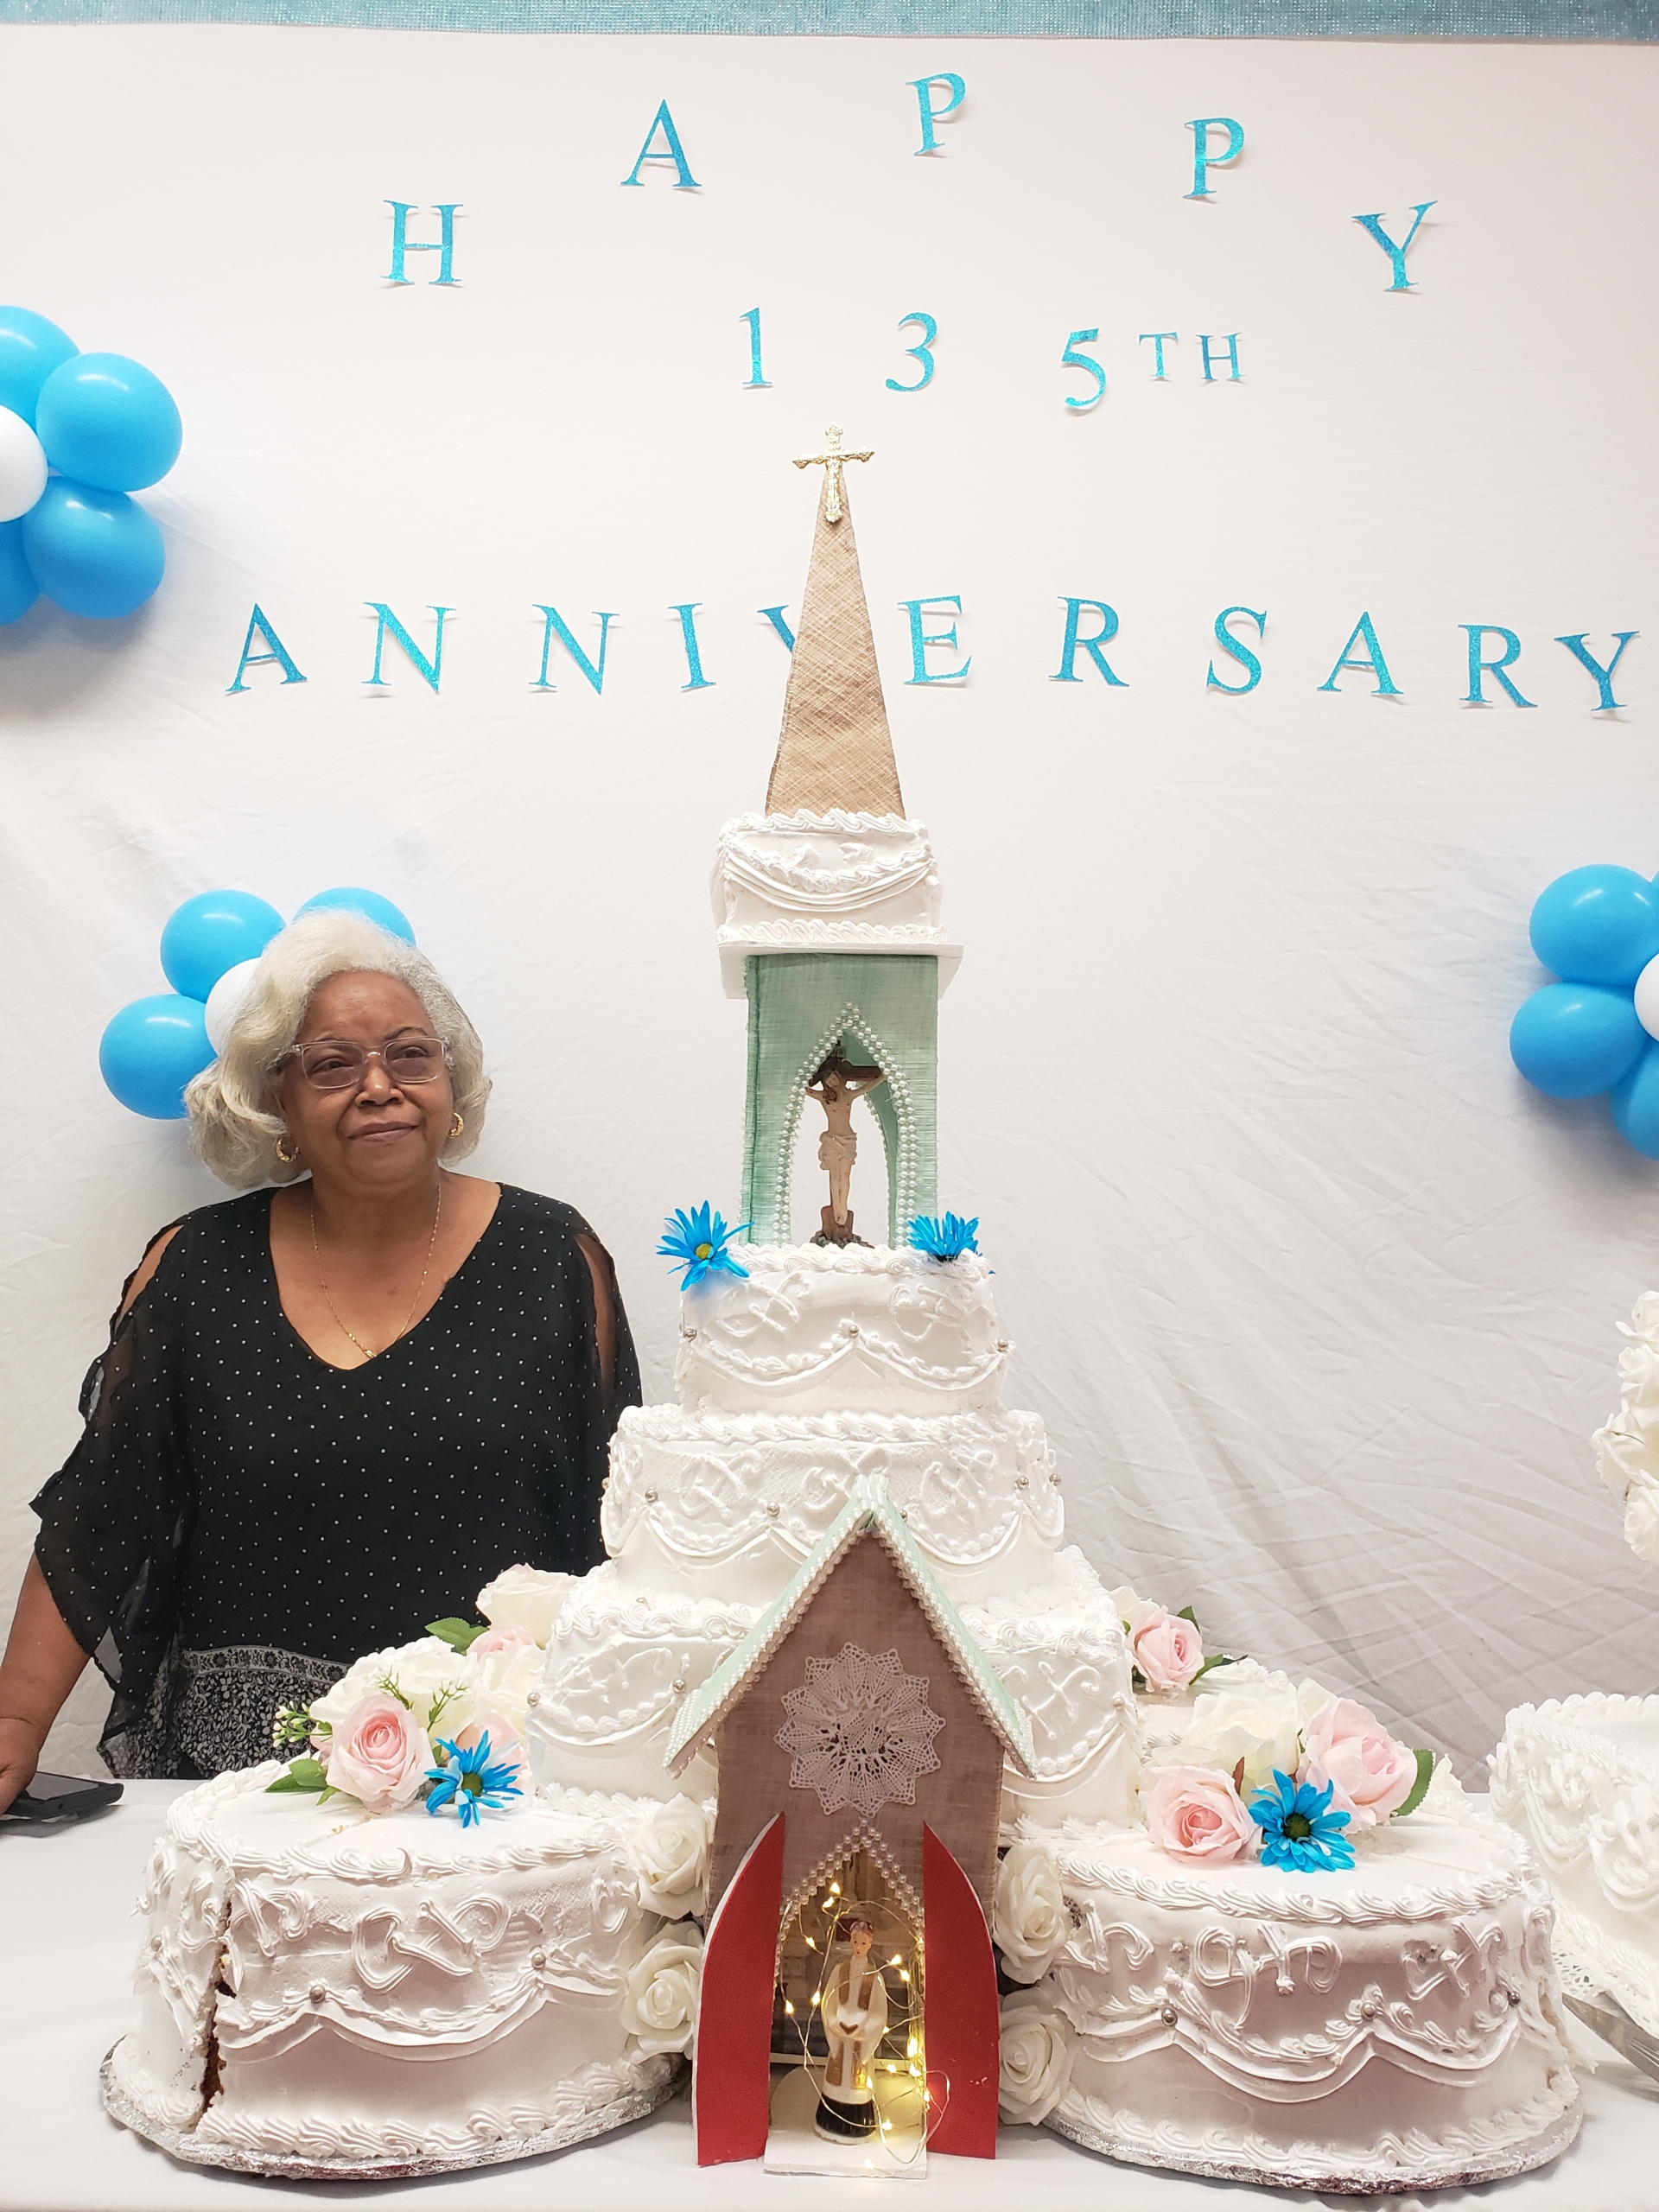 A woman standing next to a cake with a picture of a wedding.